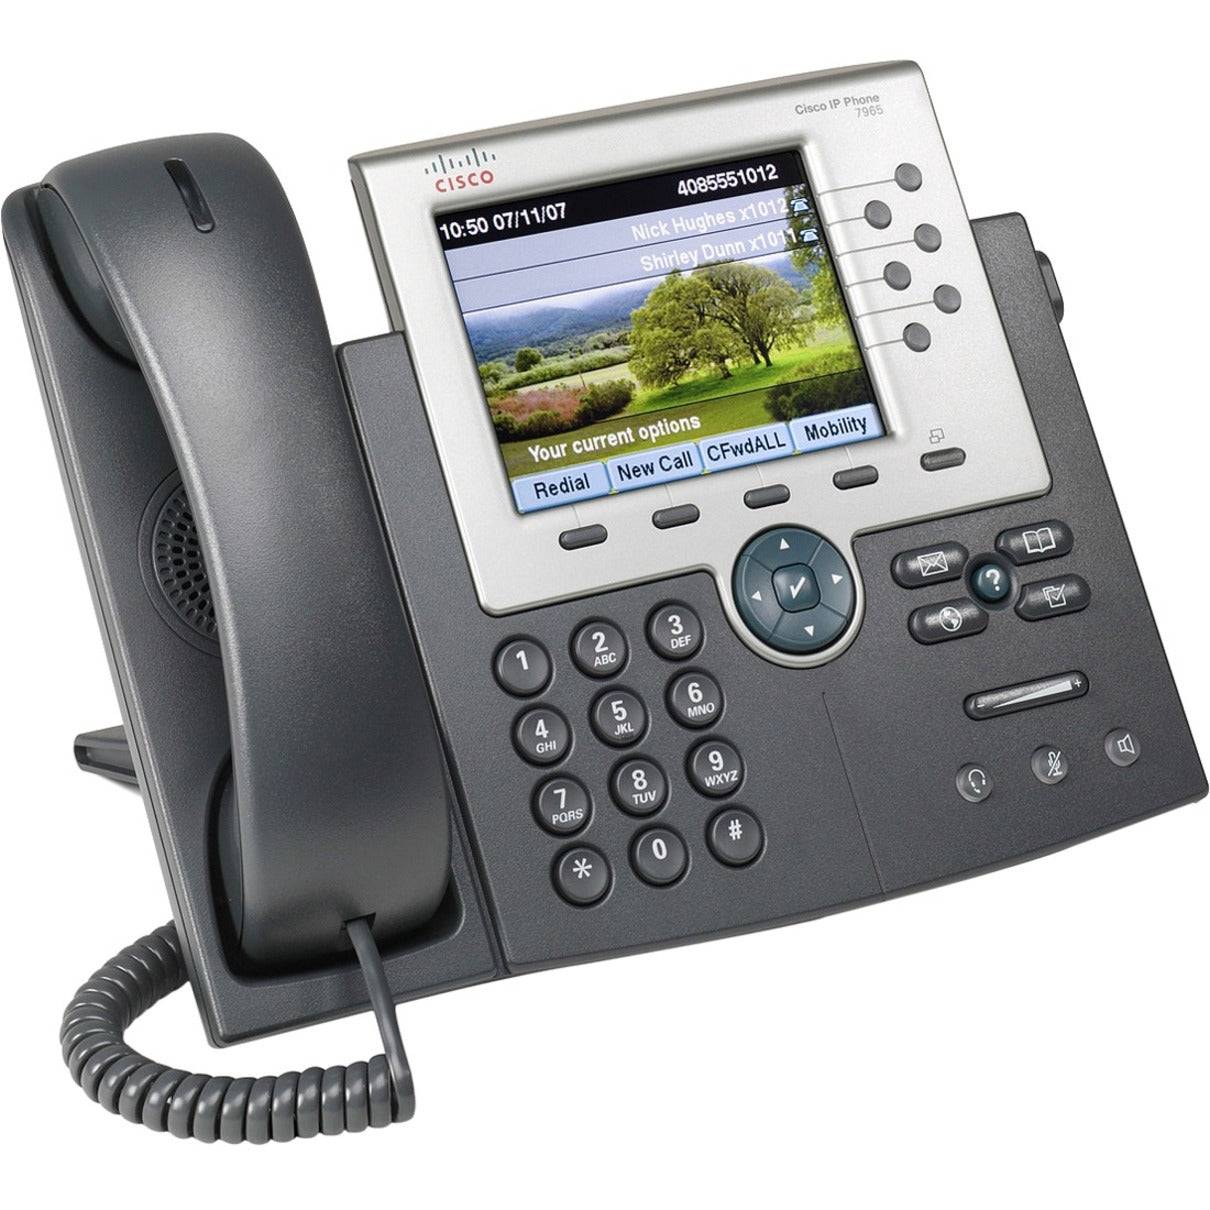 Cisco CP-7965G Unified IP Phone Color Display Full-Duplex Speakerphone PoE Support 